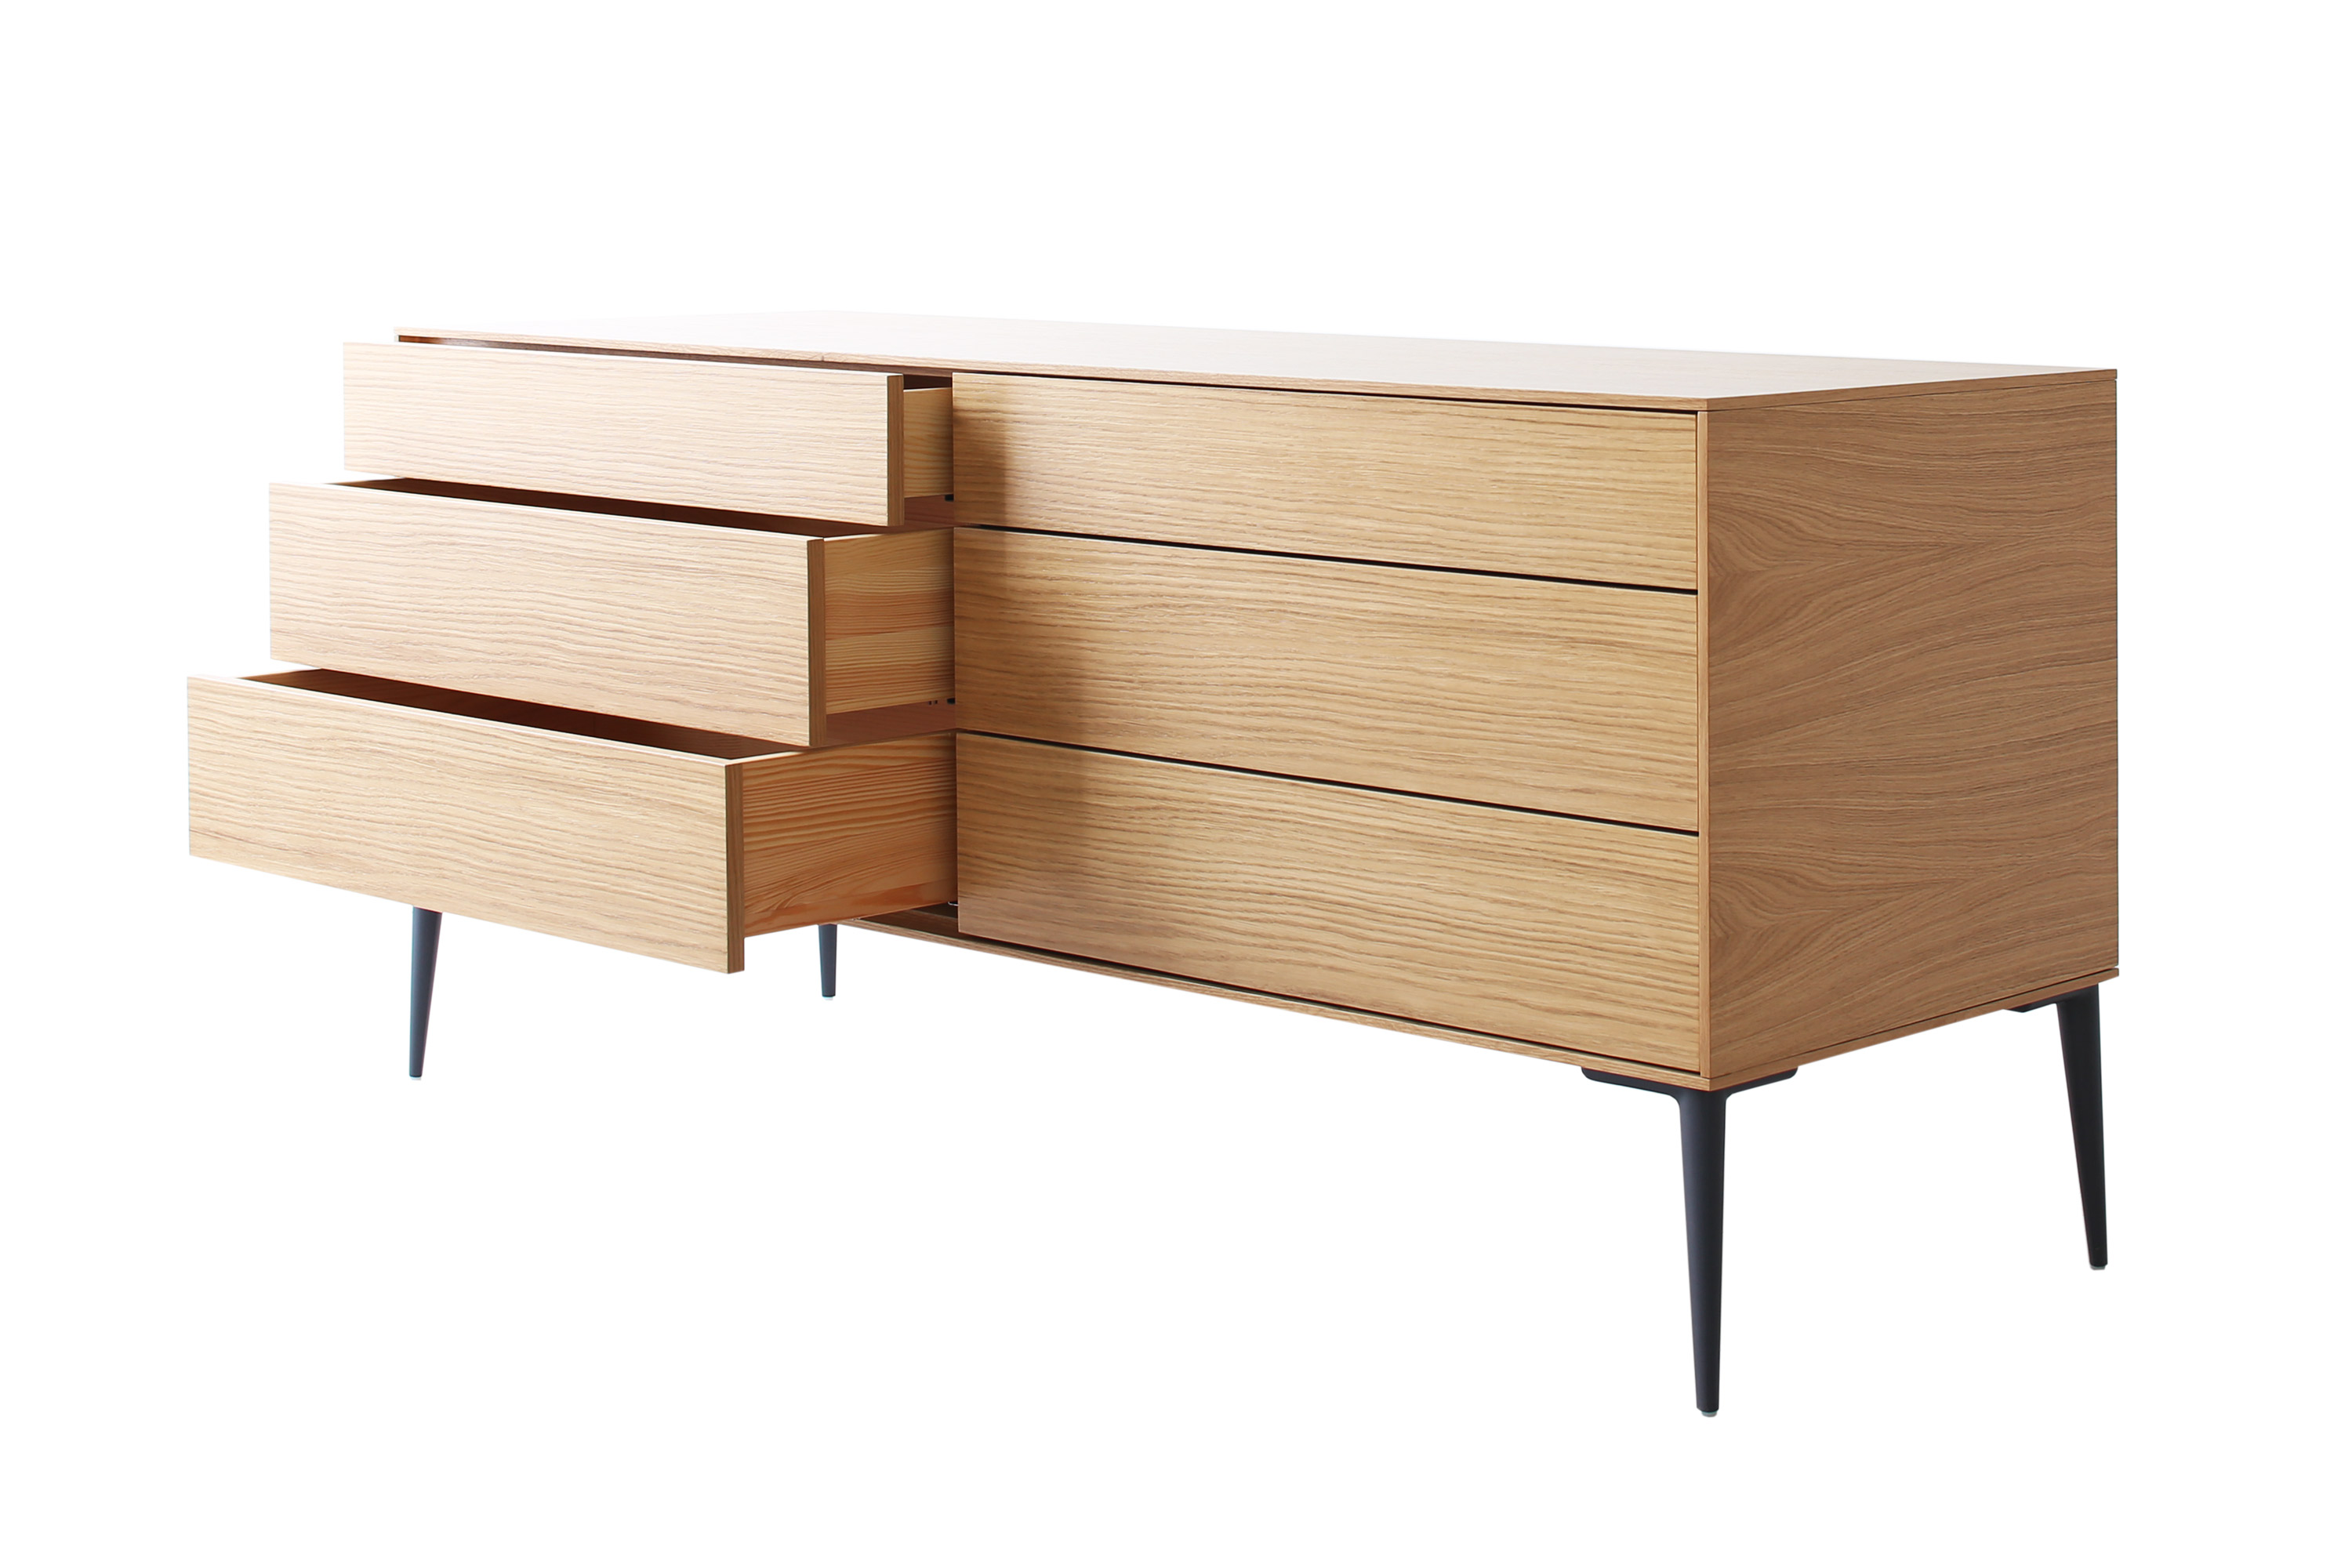 chest of drawers in oak from sofia bedroom collection